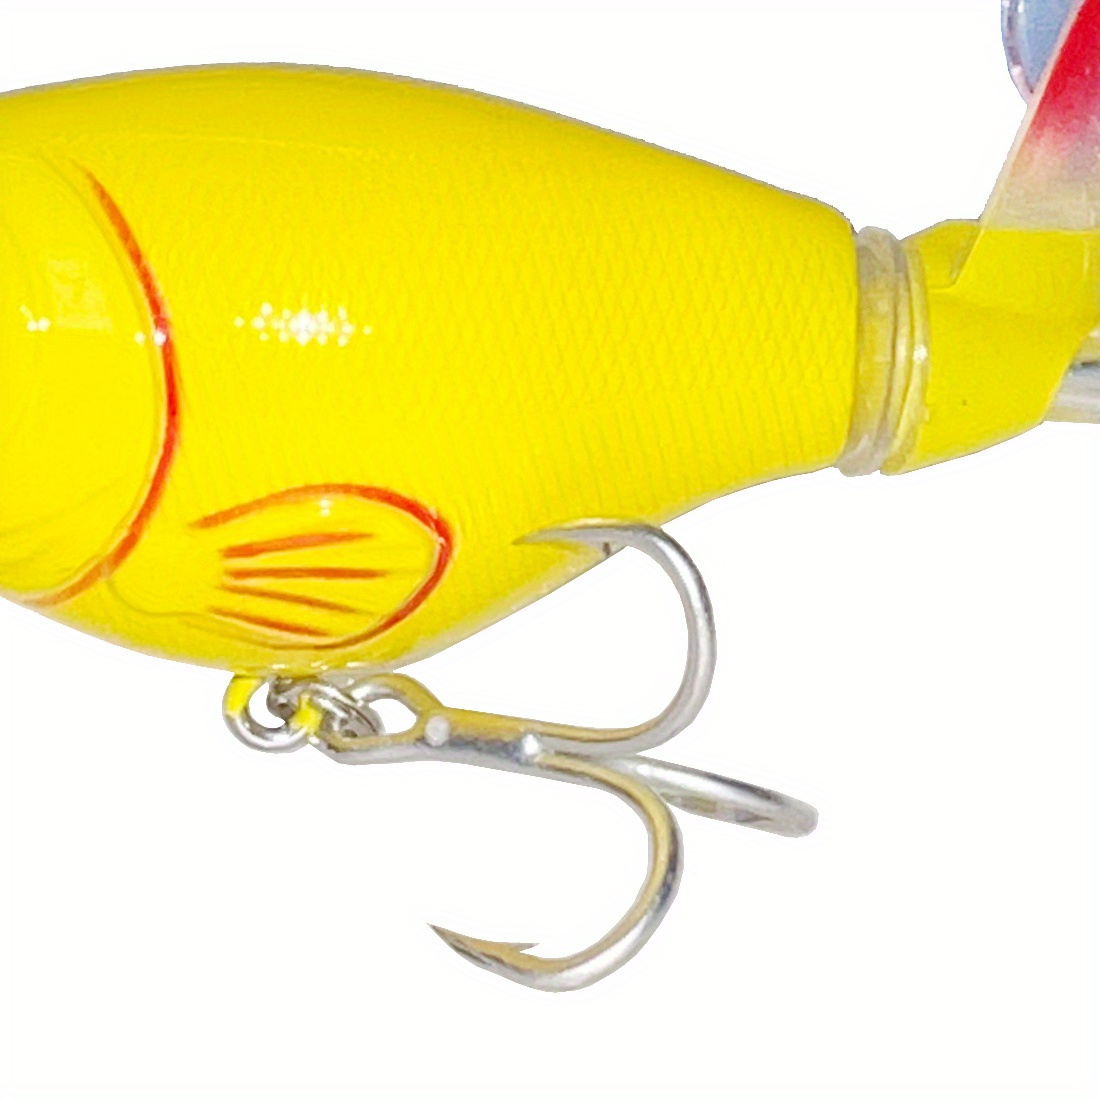 Proberos Whopper Plopper Fishing Lure with Floating Rotating Tail - Topwater  Freshwater and Saltwater Lures for Carp, Bass, Pike in 0.4oz/0.56oz &  3.14/3.66in